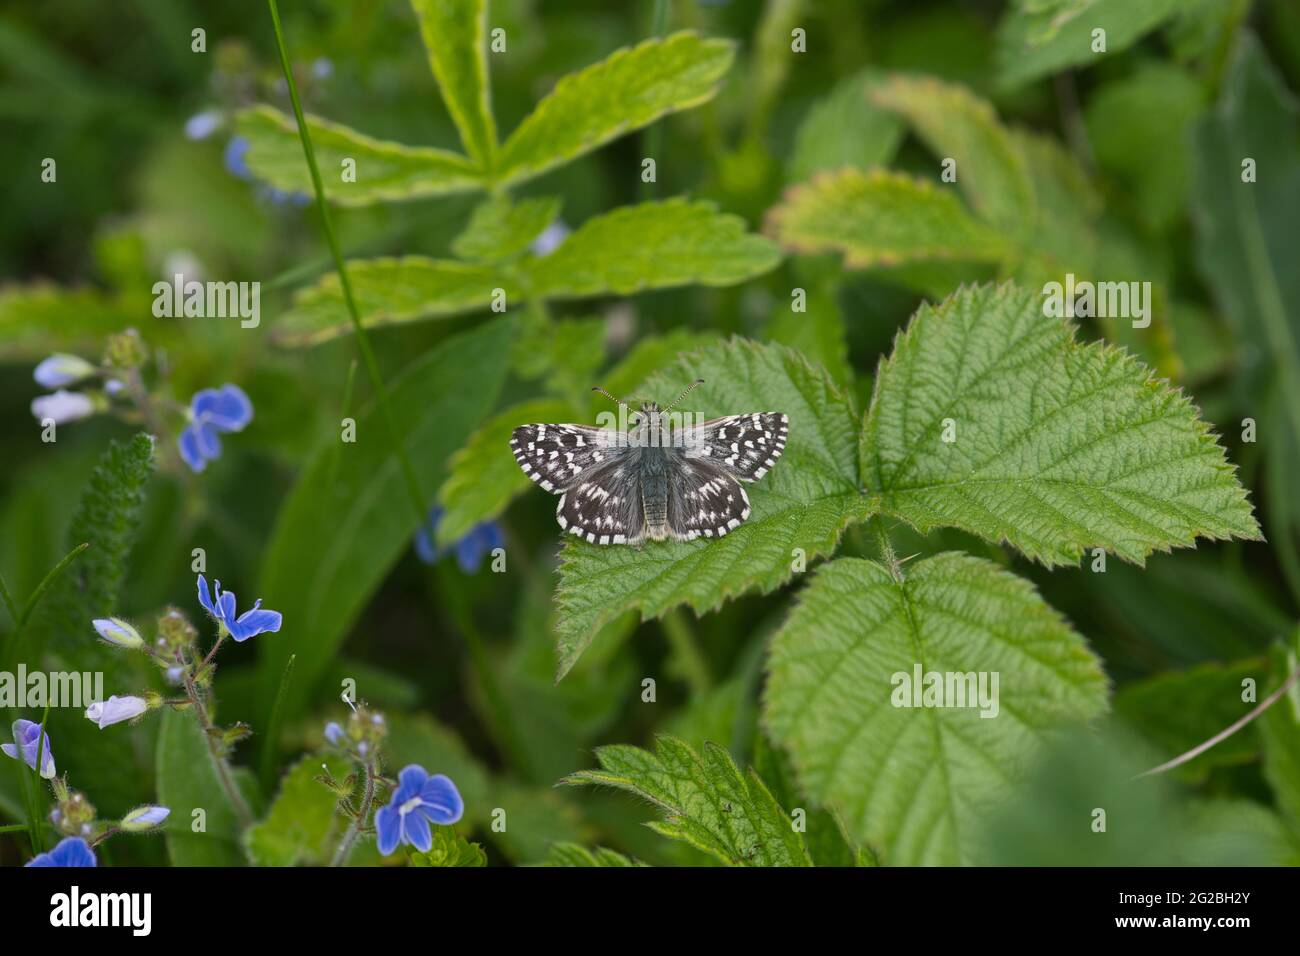 Grizzled skipper ) Pyrgus malvae) butterfly, upperside Stock Photo